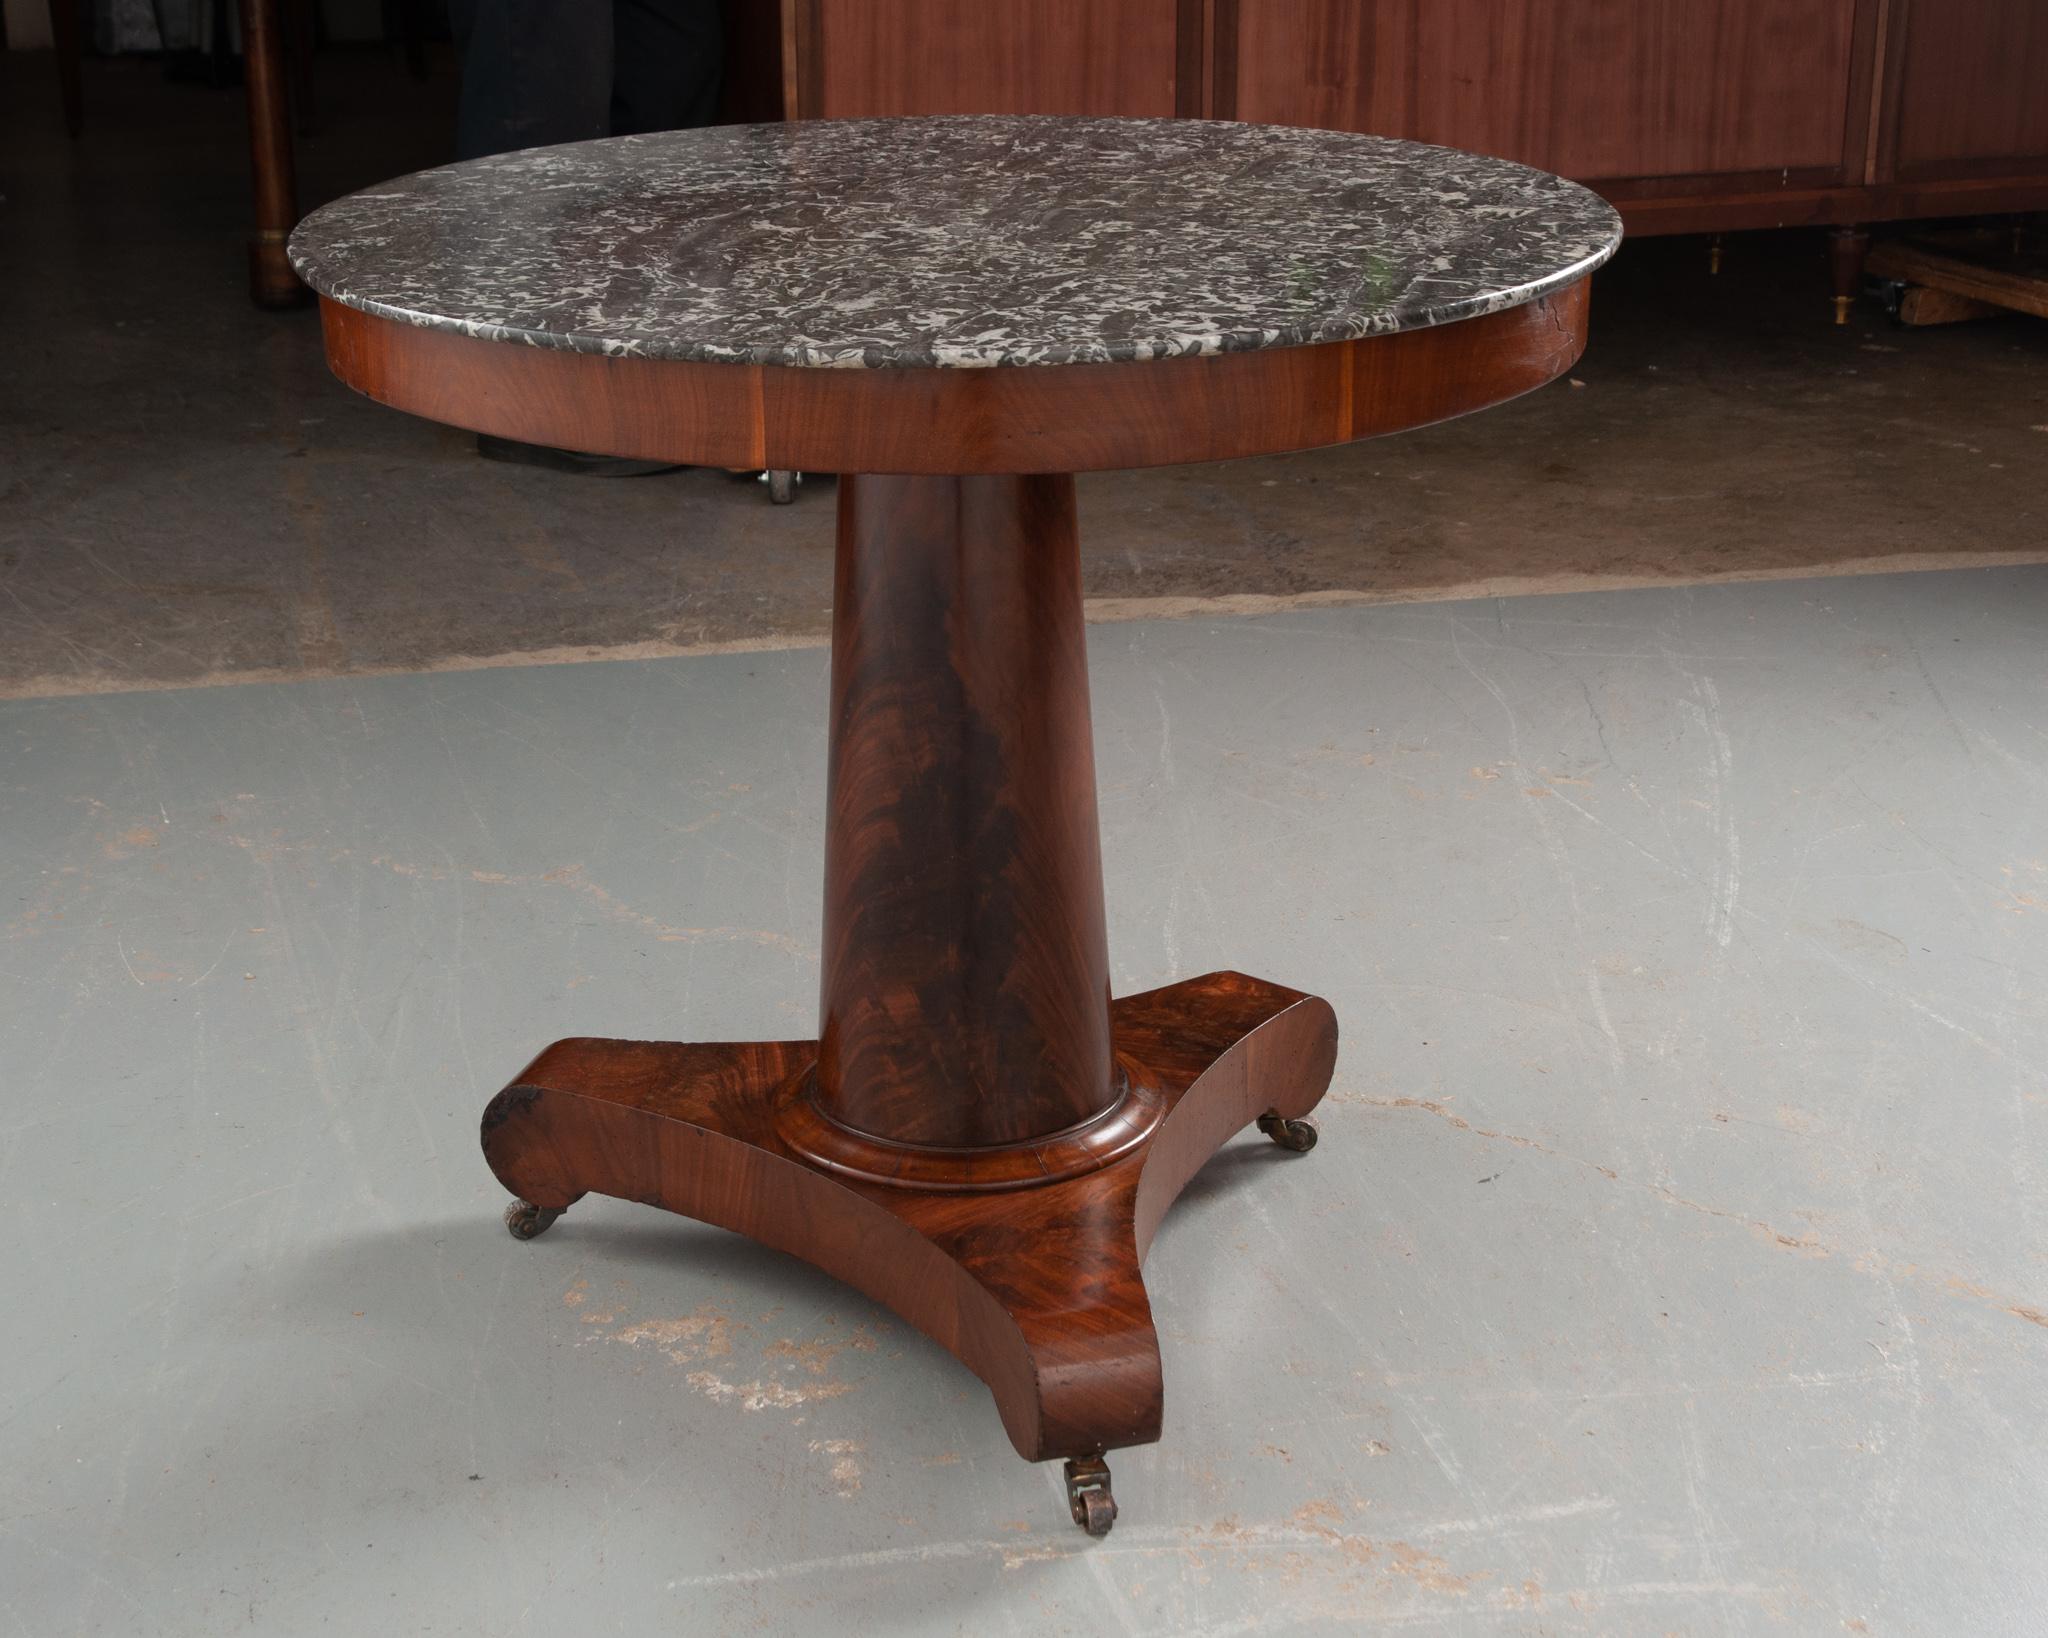 This outstanding French 19th century Empire style center table is the perfect addition to any interior. The gray and white marble top is removable and in great antique condition; it beautifully compliments the rich wood tones of the base. The top is